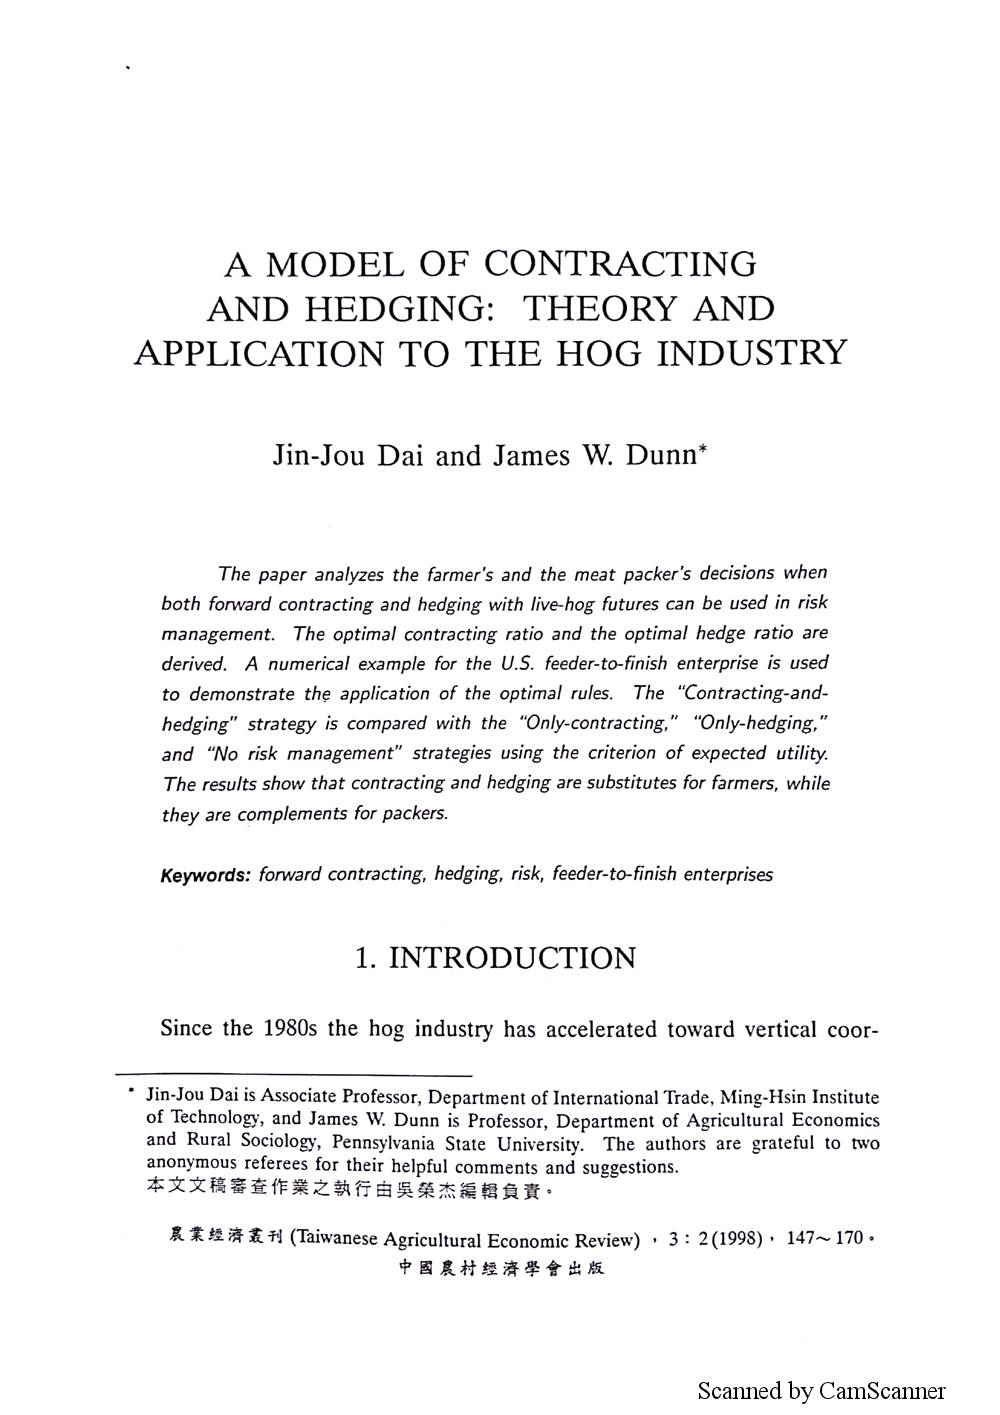 A_Model_of_Contracting_and_Hedging.jpg